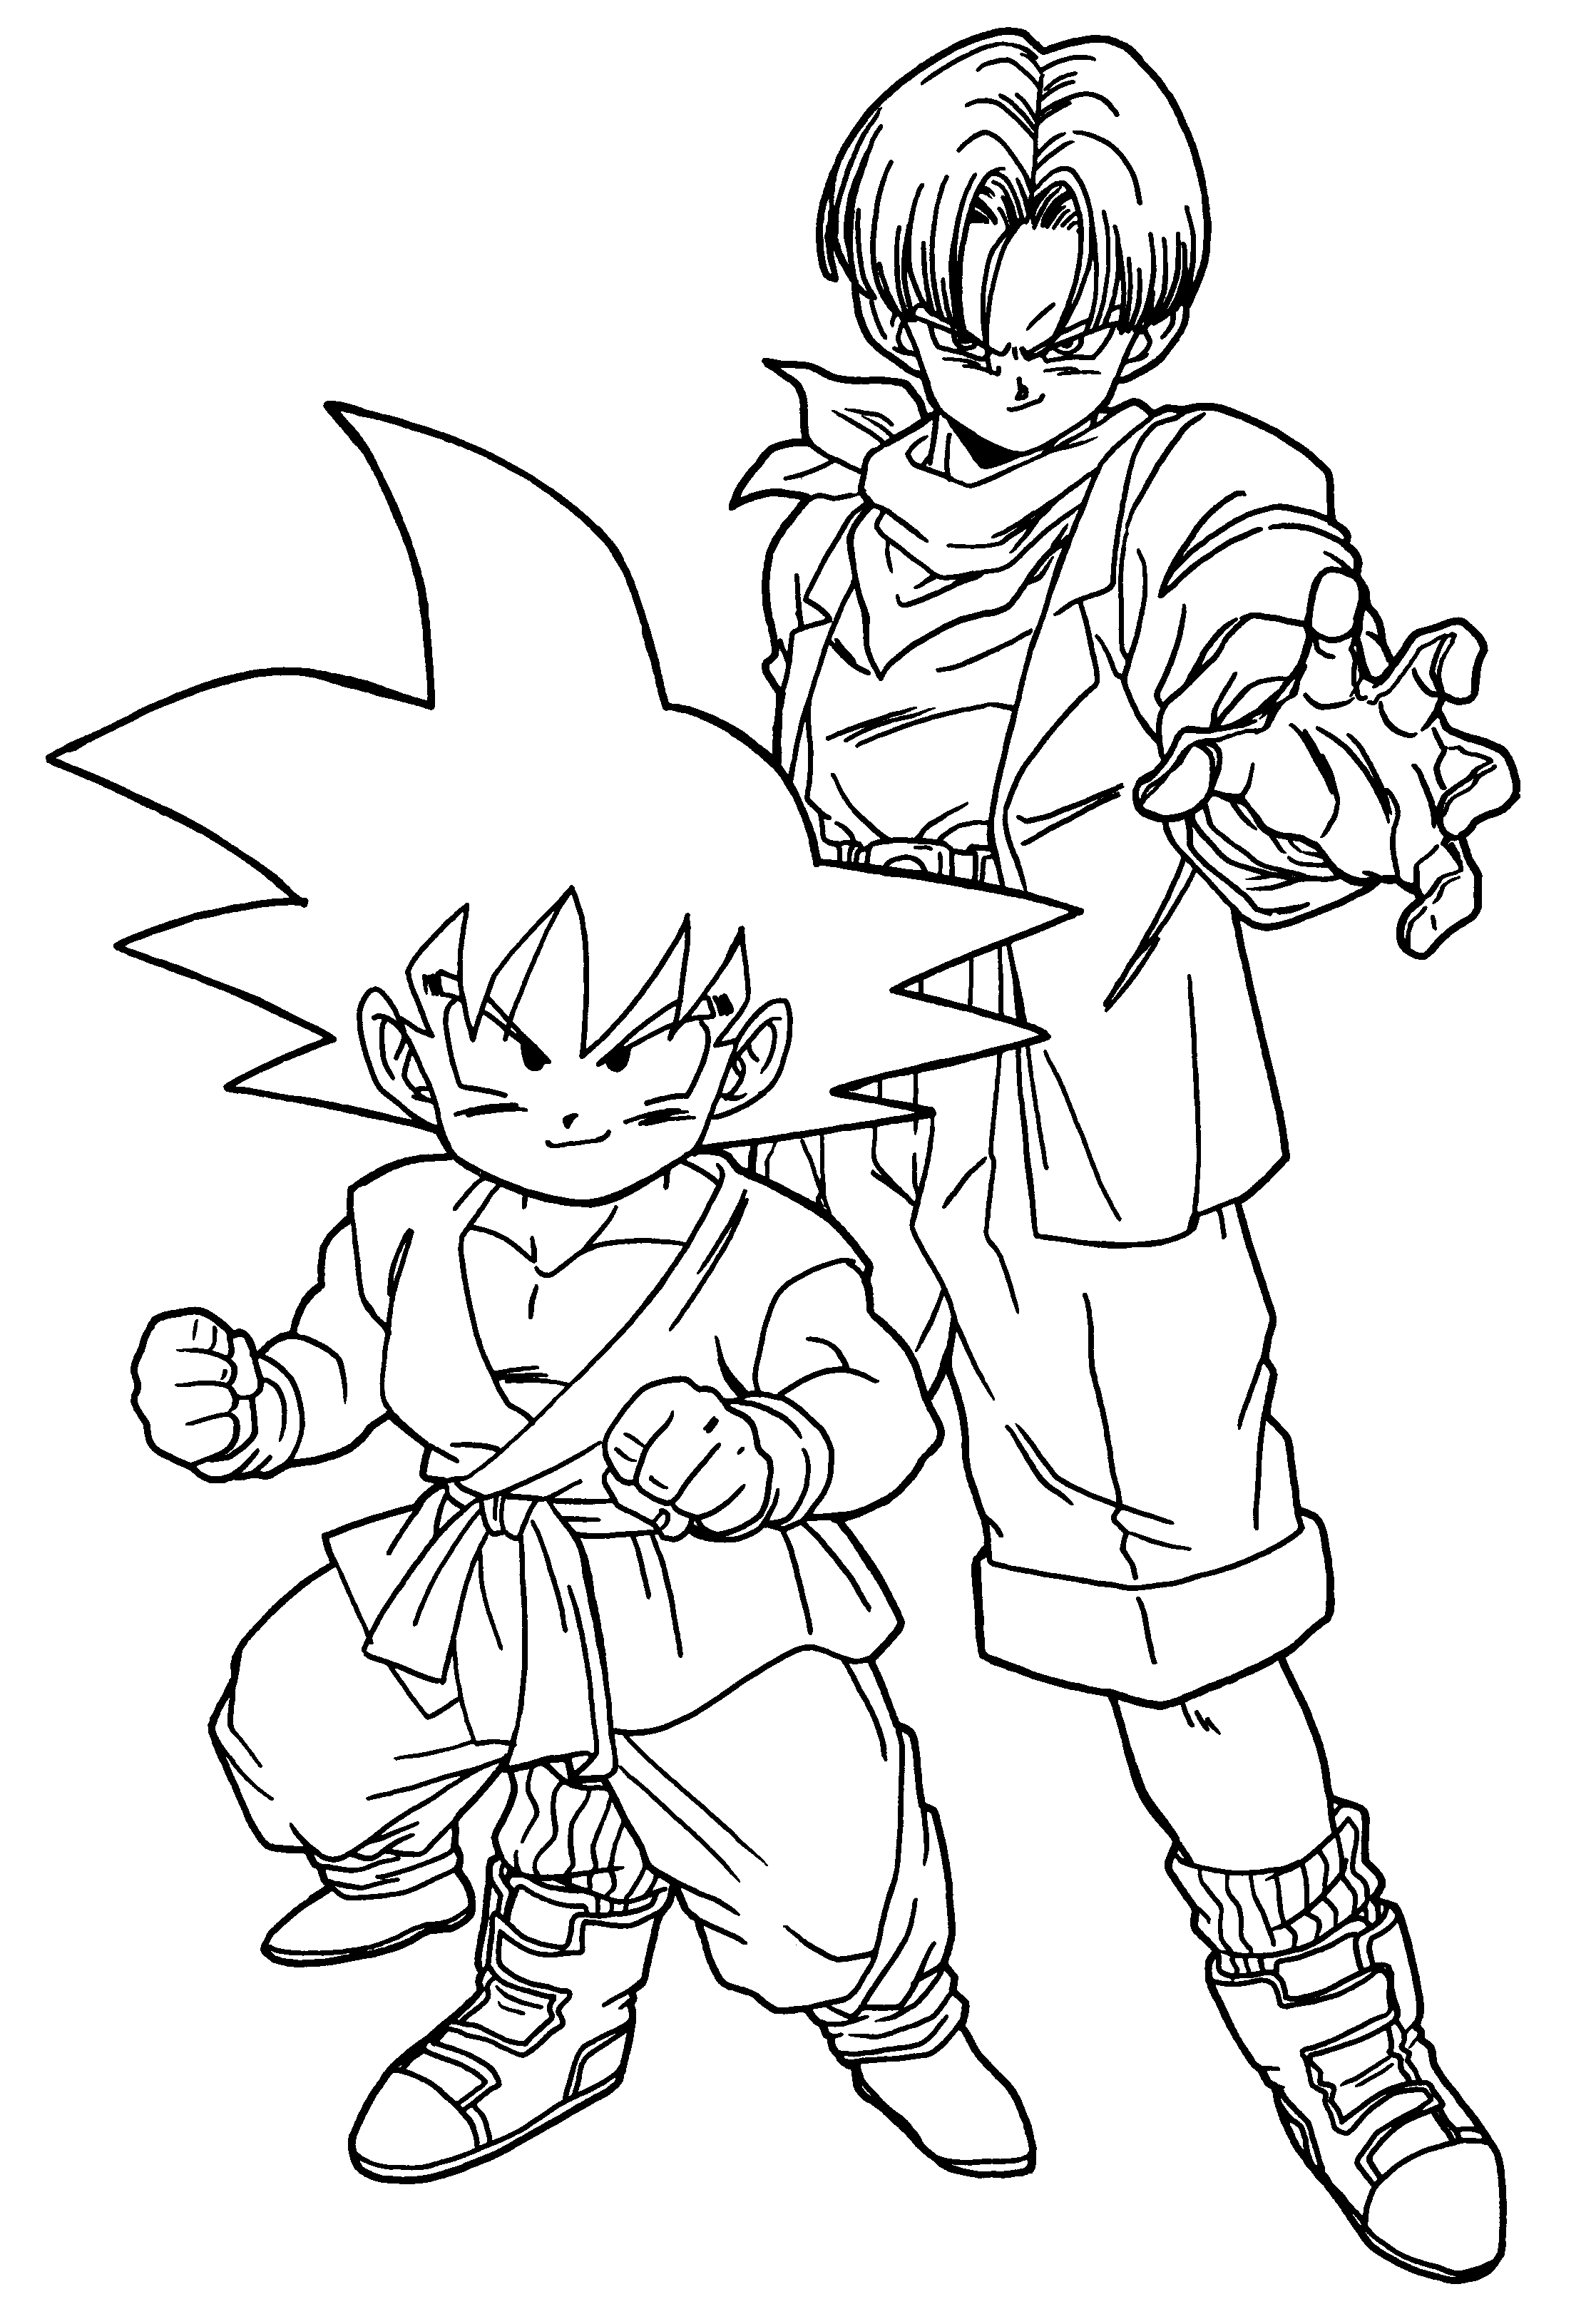 Dragon-Ball-Z-Coloring-Pages